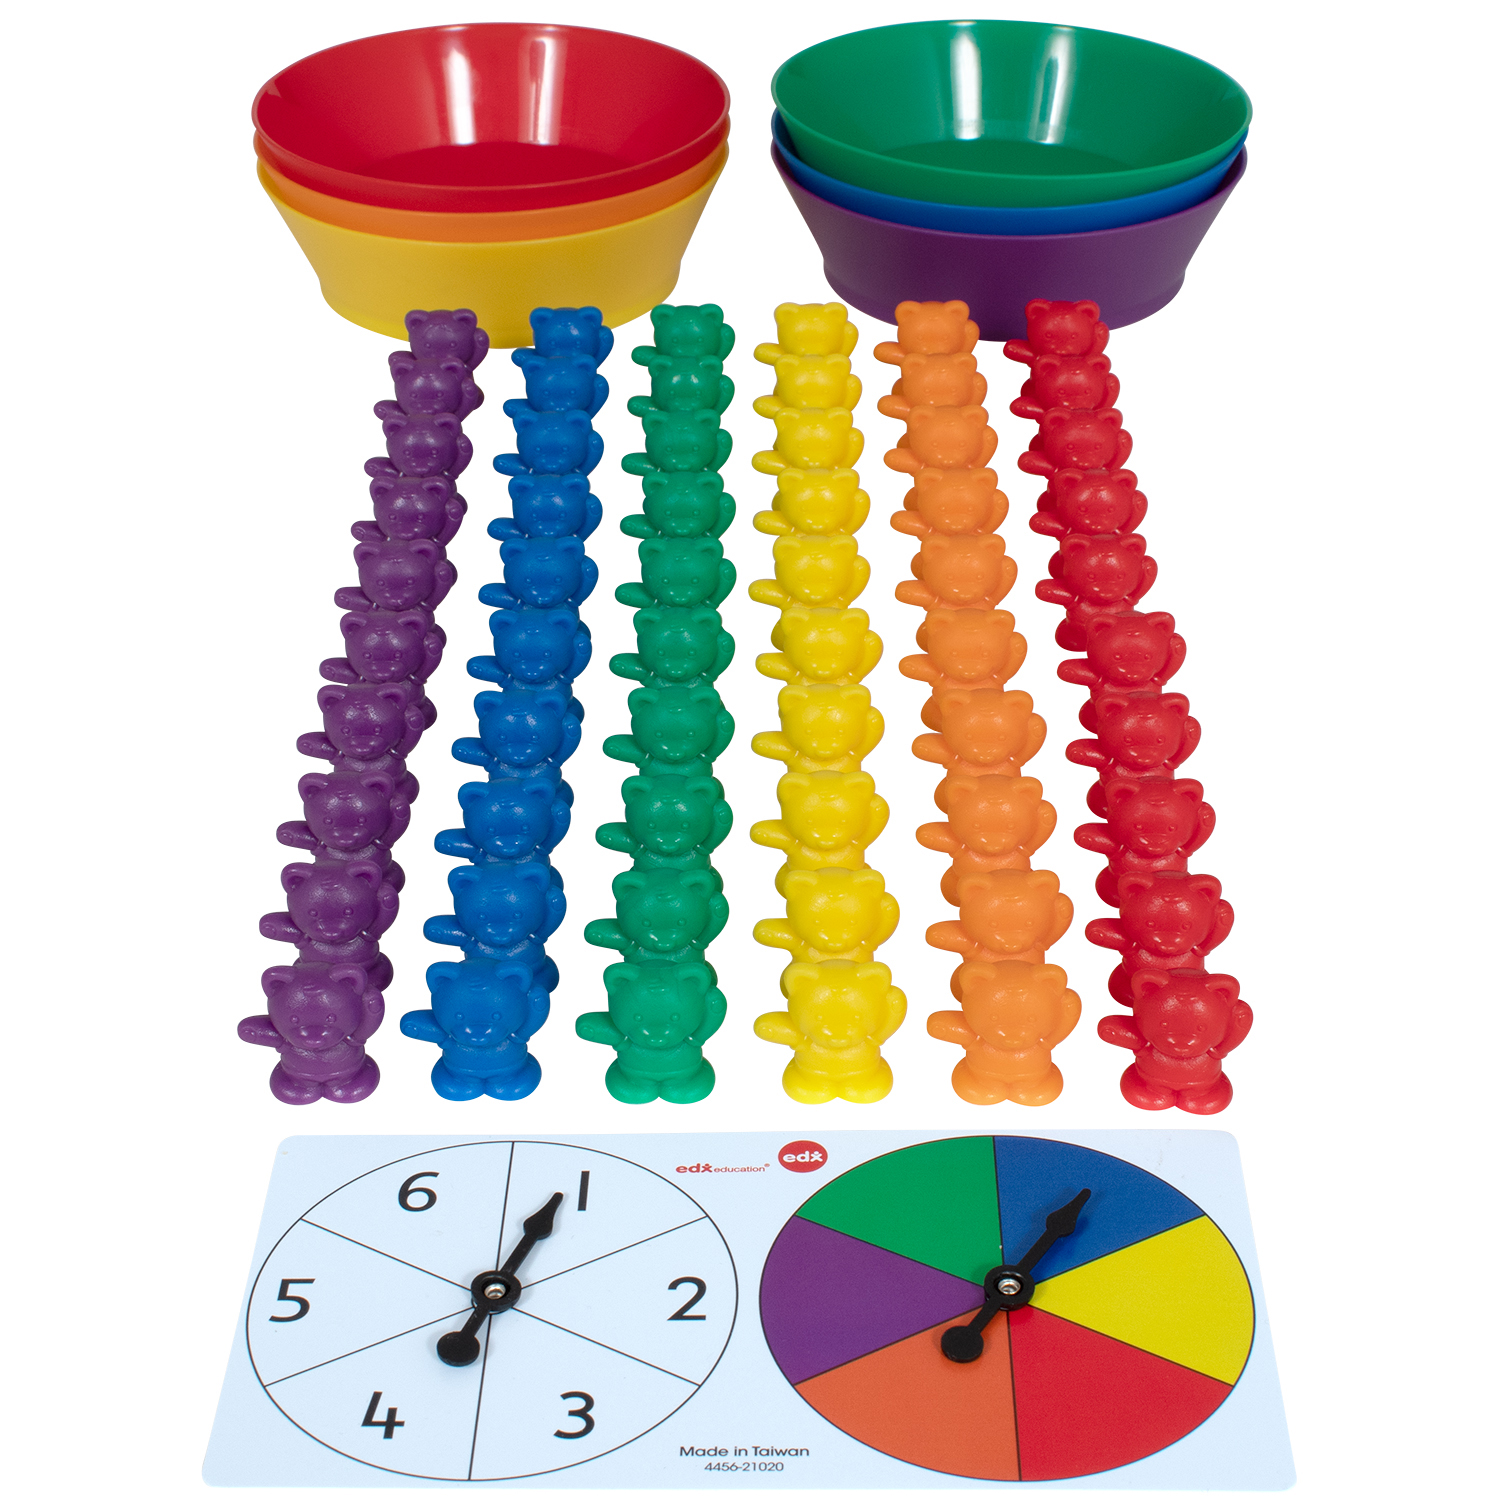 edxeducation Counting Bears with Matching Bowls - 68pc Set - 60 Bear Counters, 6 Bowls & 2 Game Spinners image number null